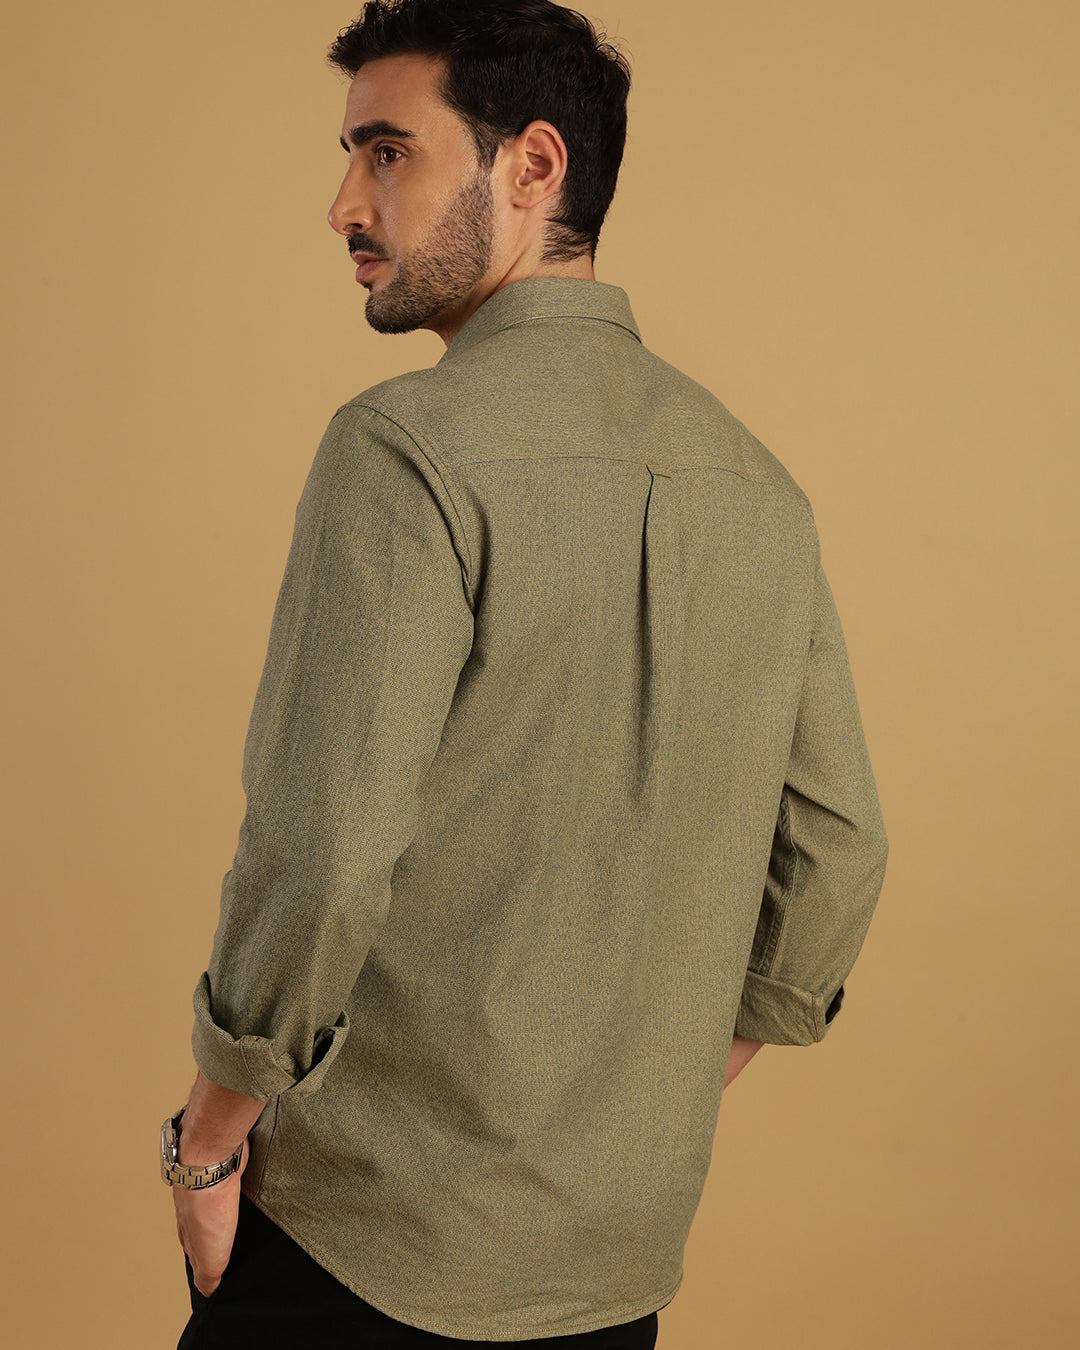 Discover Crocodile Grindle Textured Green Shirt Online